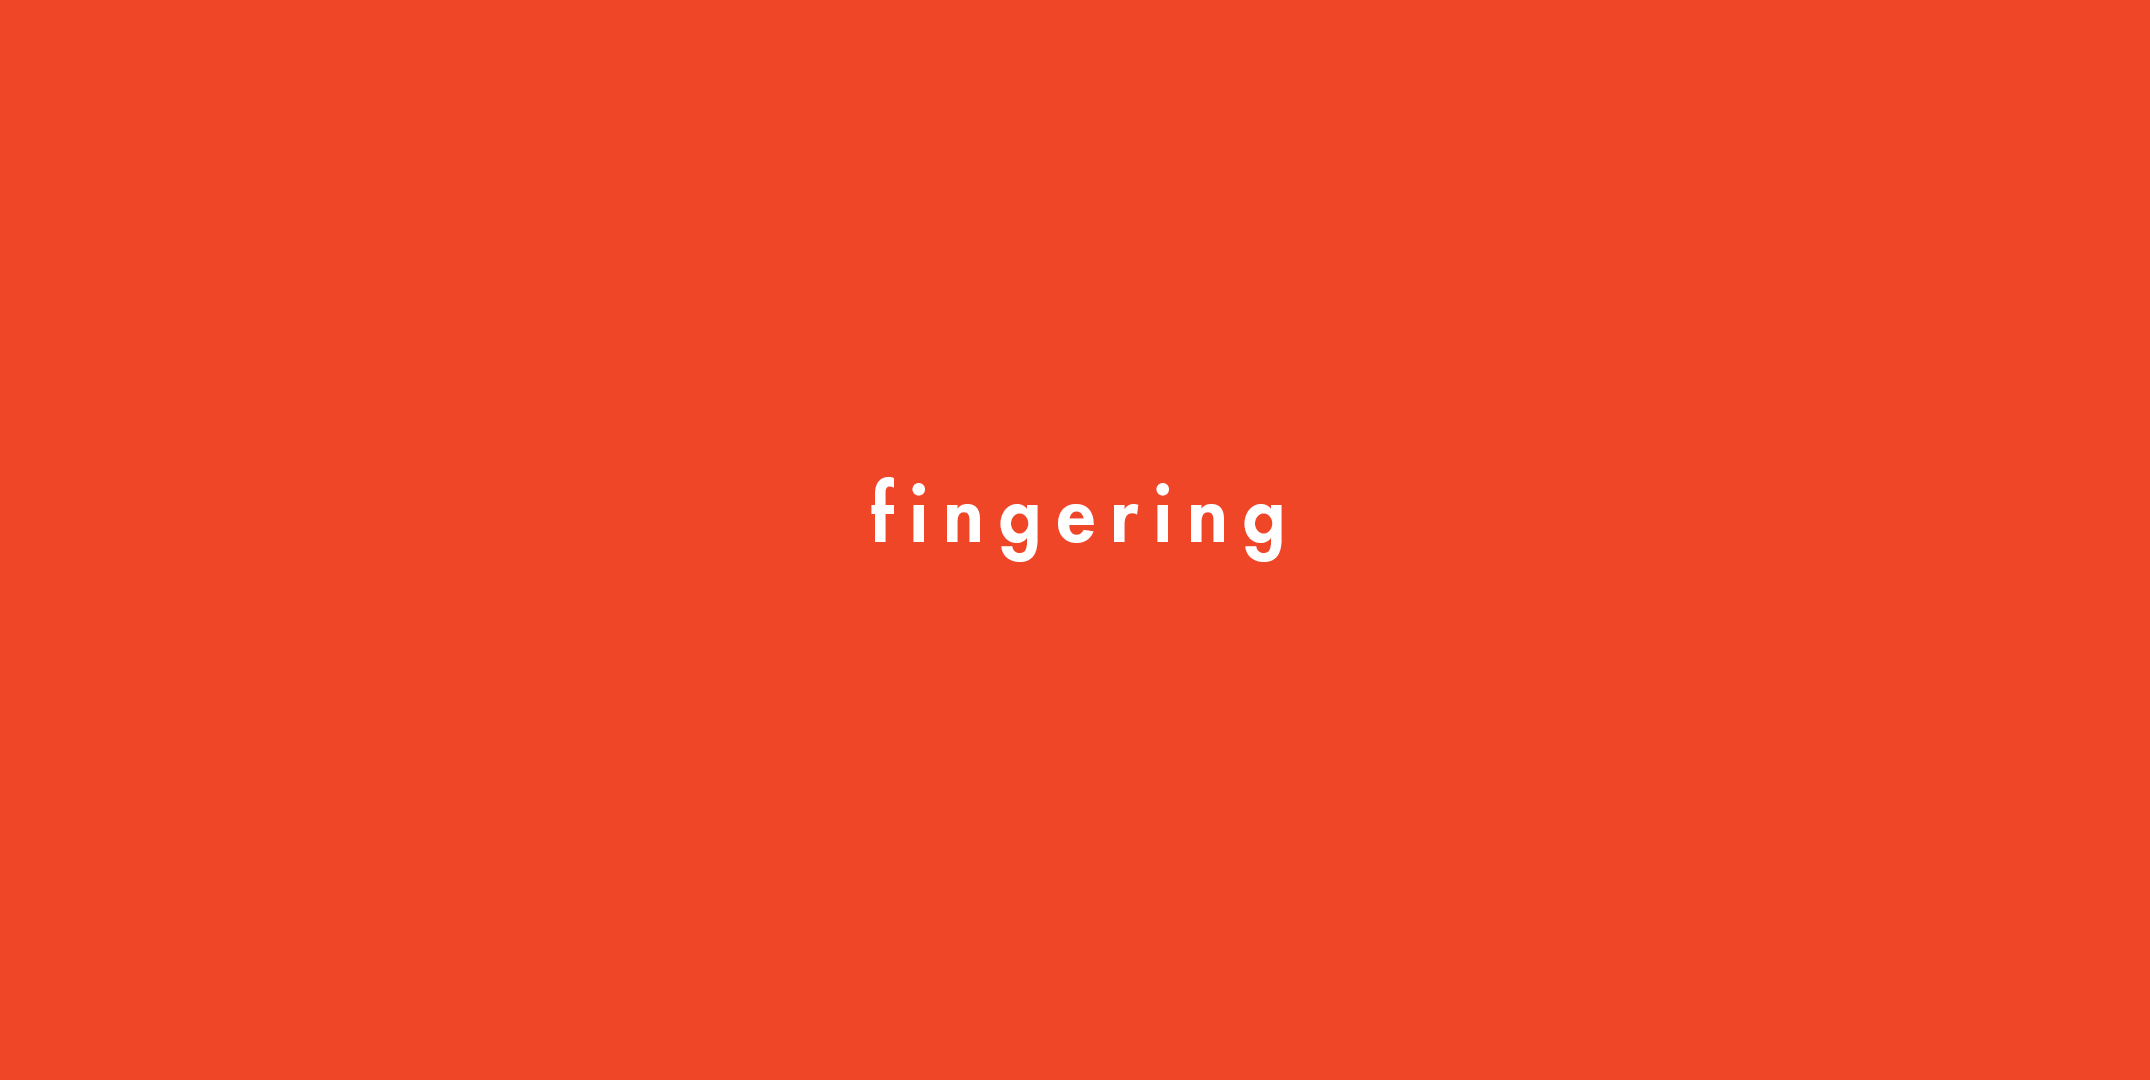 What Does Fingering Mean